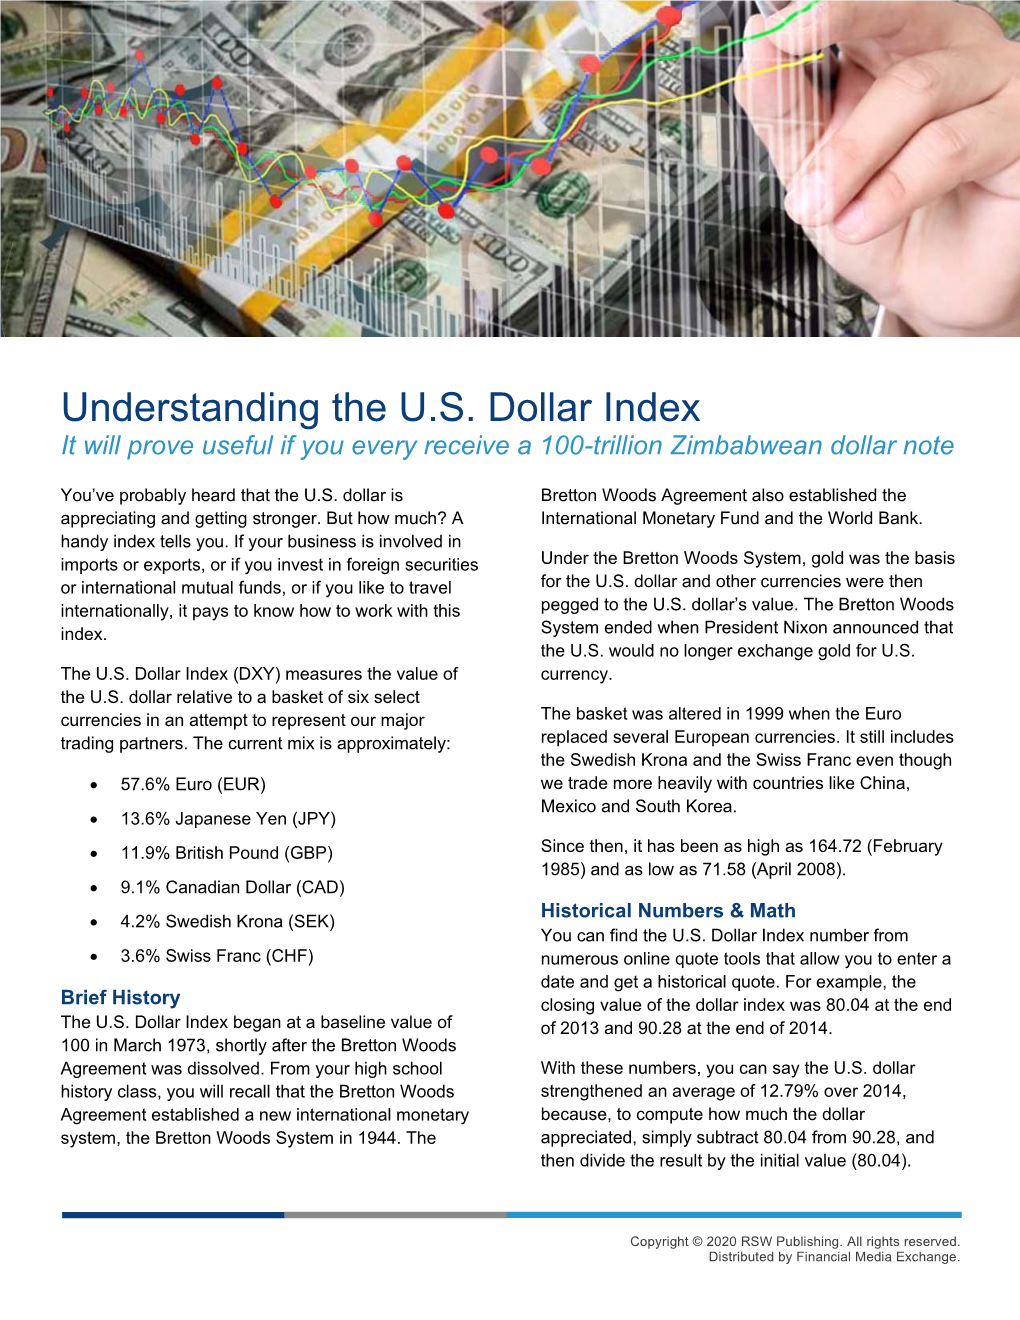 Understanding the U.S. Dollar Index It Will Prove Useful If You Every Receive a 100-Trillion Zimbabwean Dollar Note